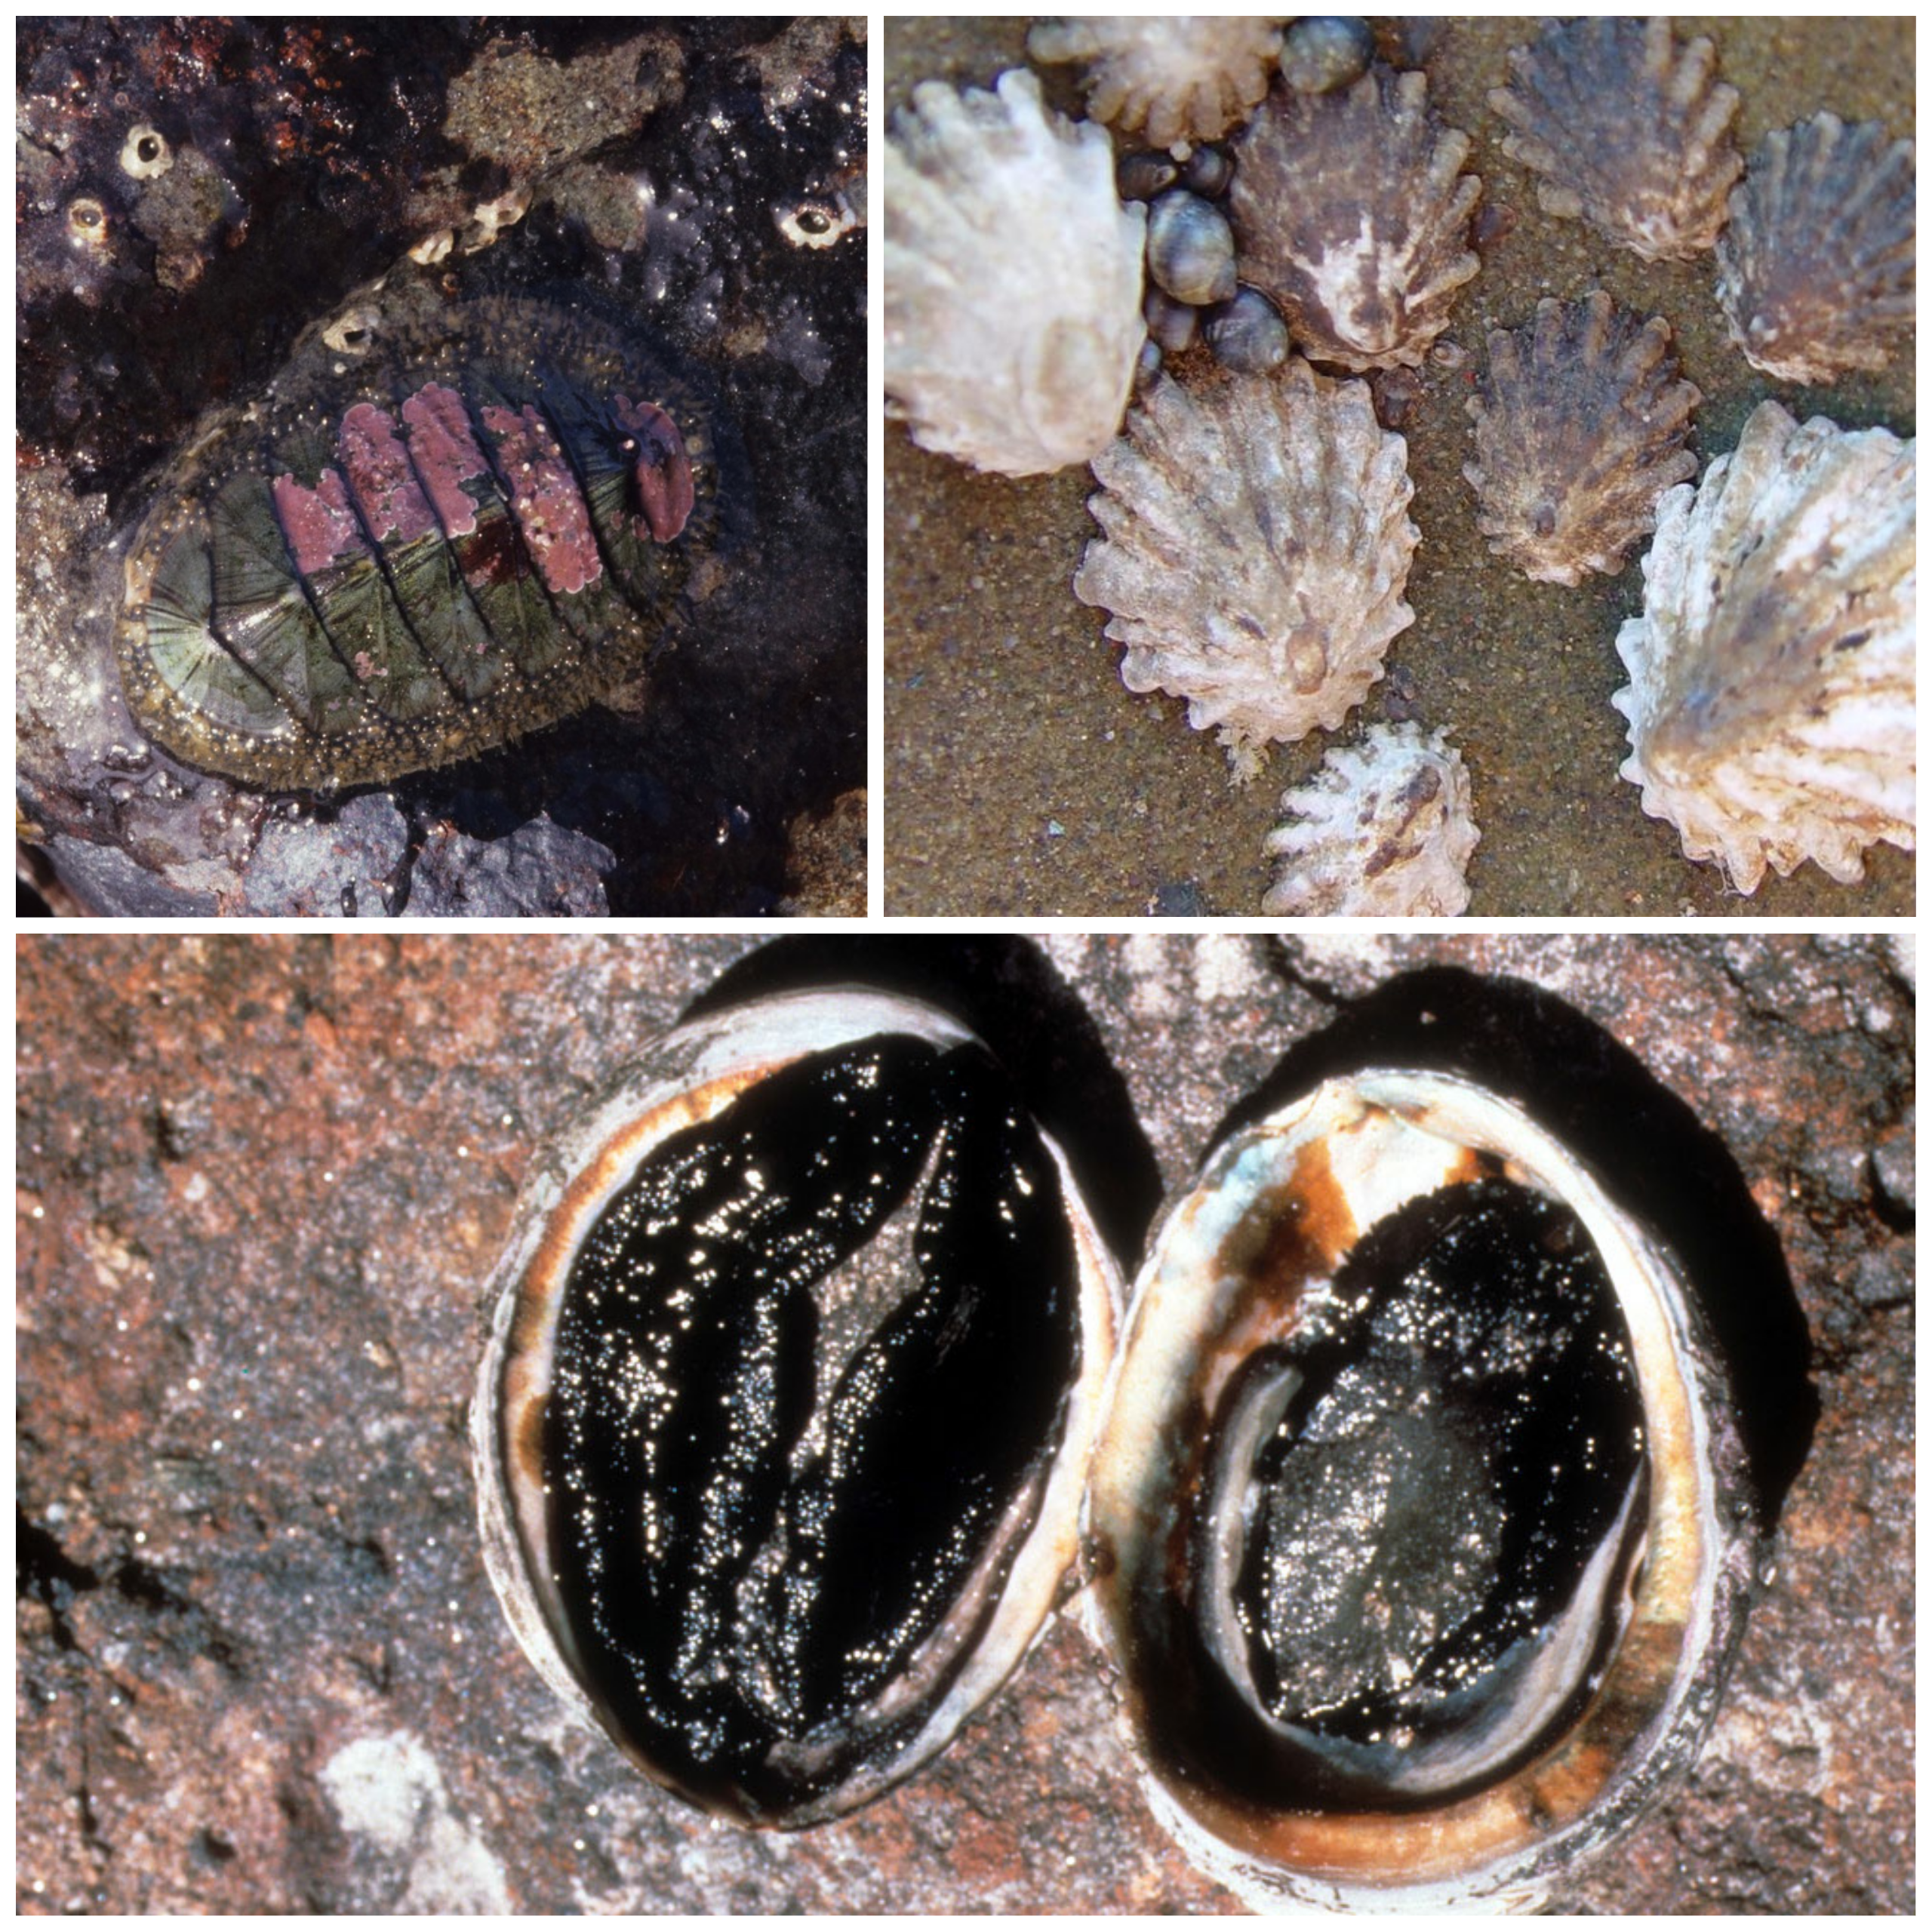 Collage of oval-shaped chiton, several round, ridged limpets, and the underside of two abalone.